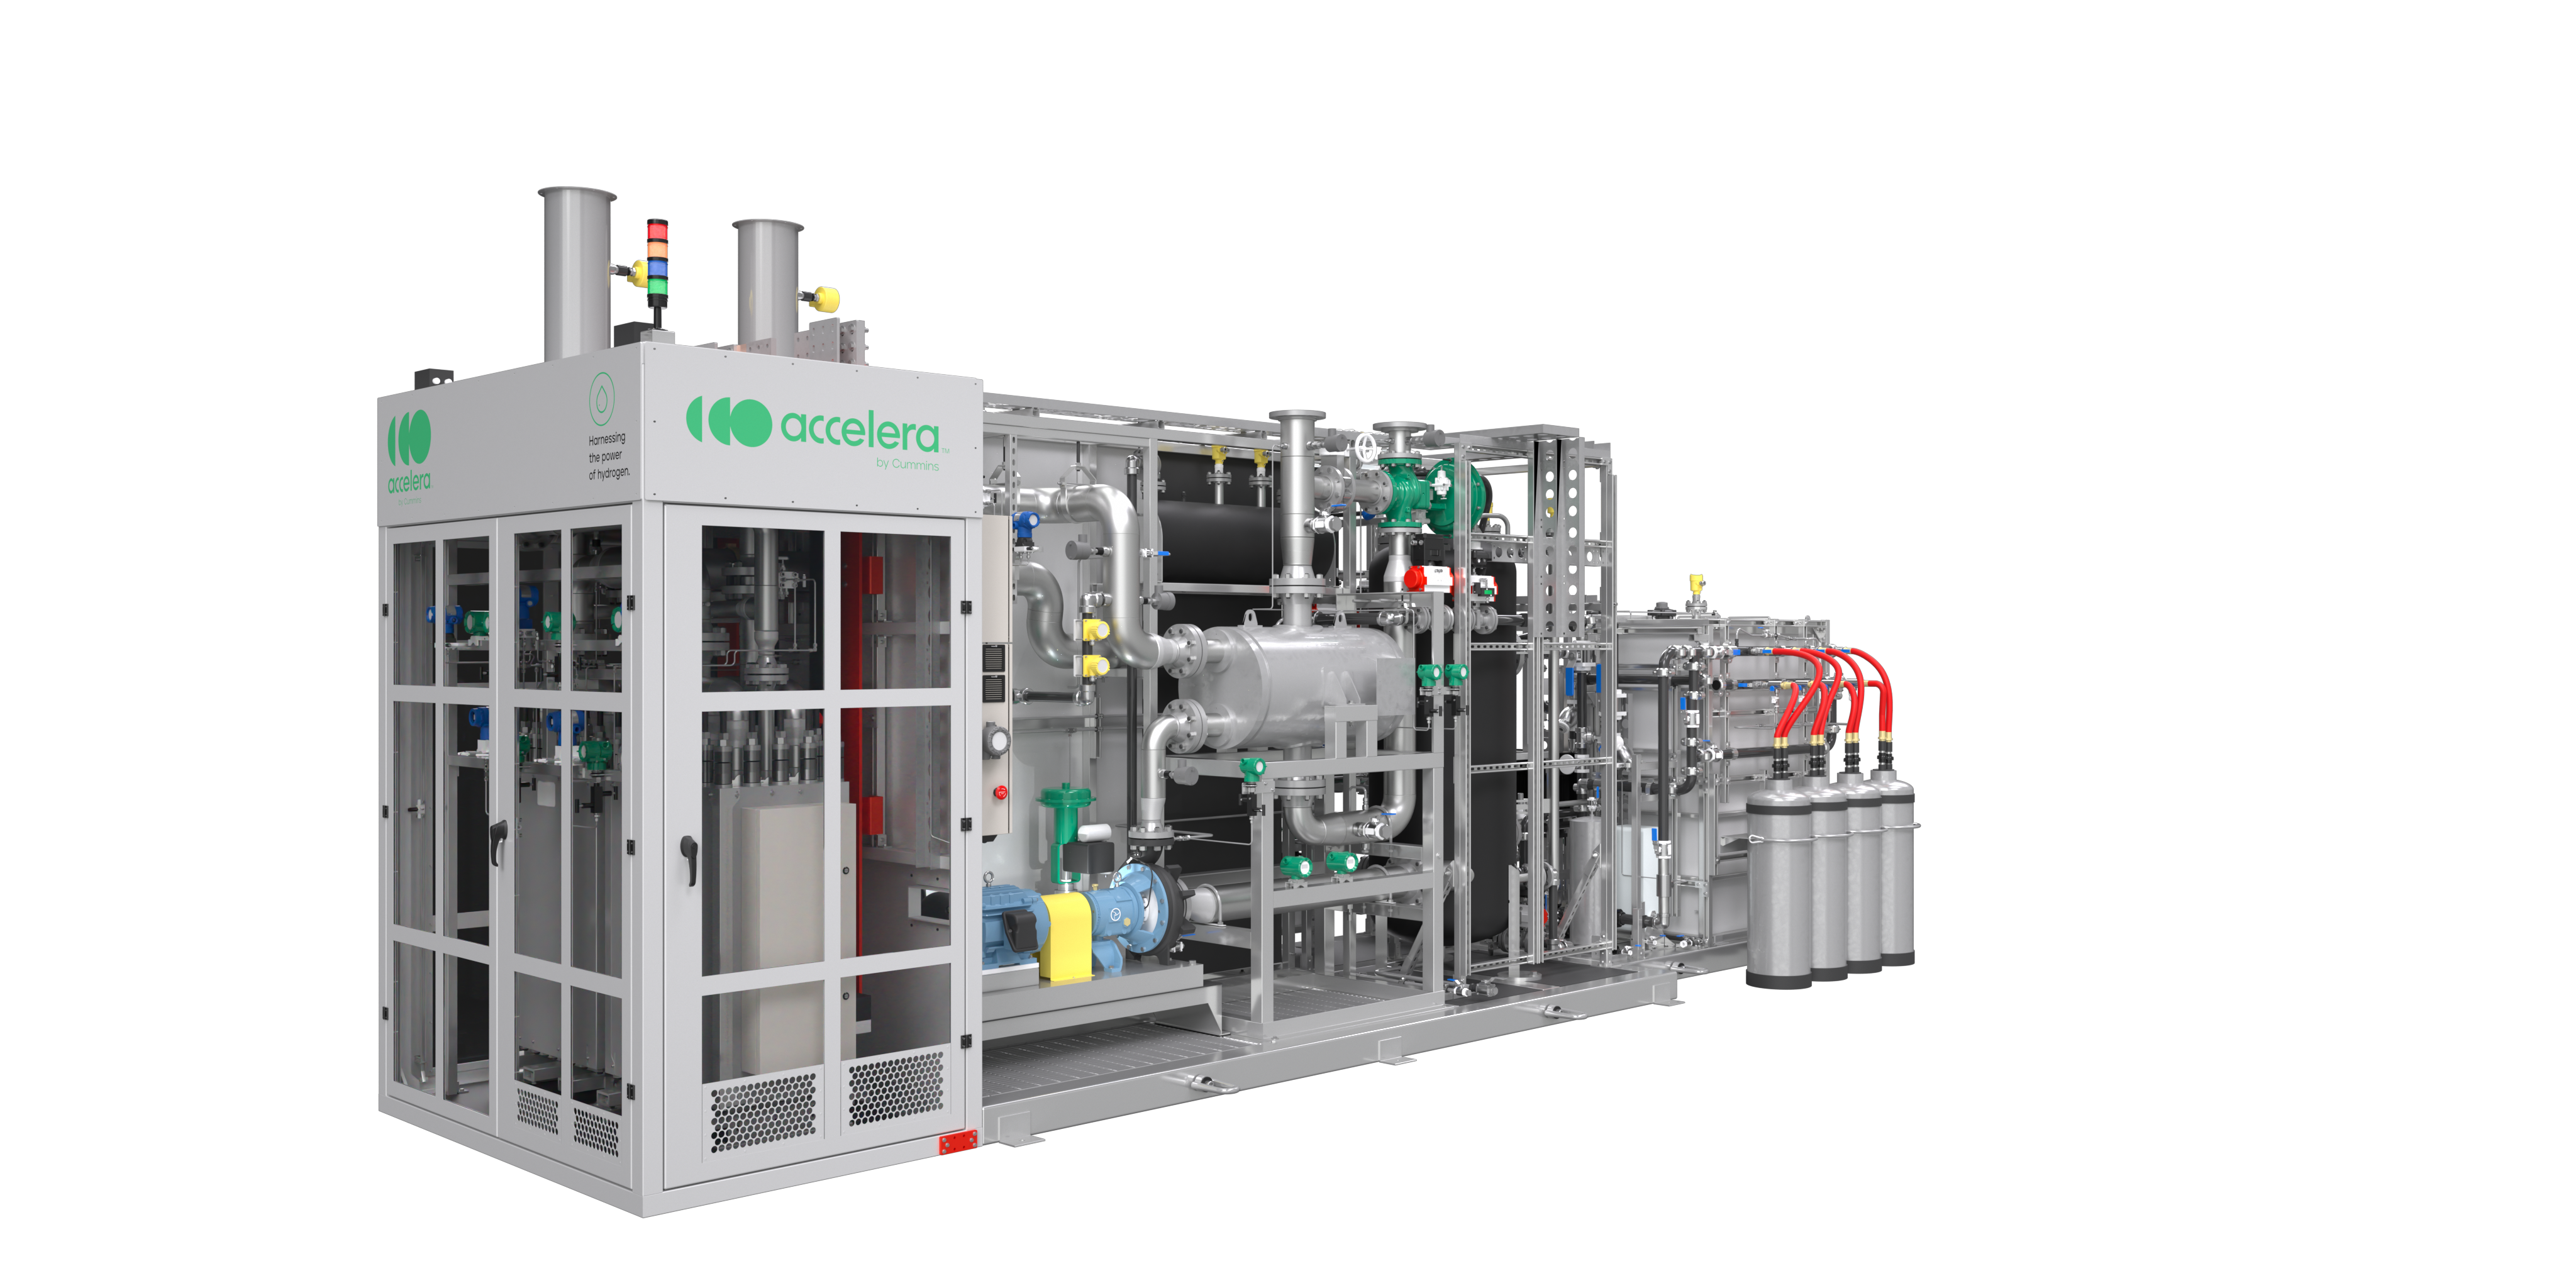 Product rendering of the Accelera HyLYZER 1000 electrolyzer system